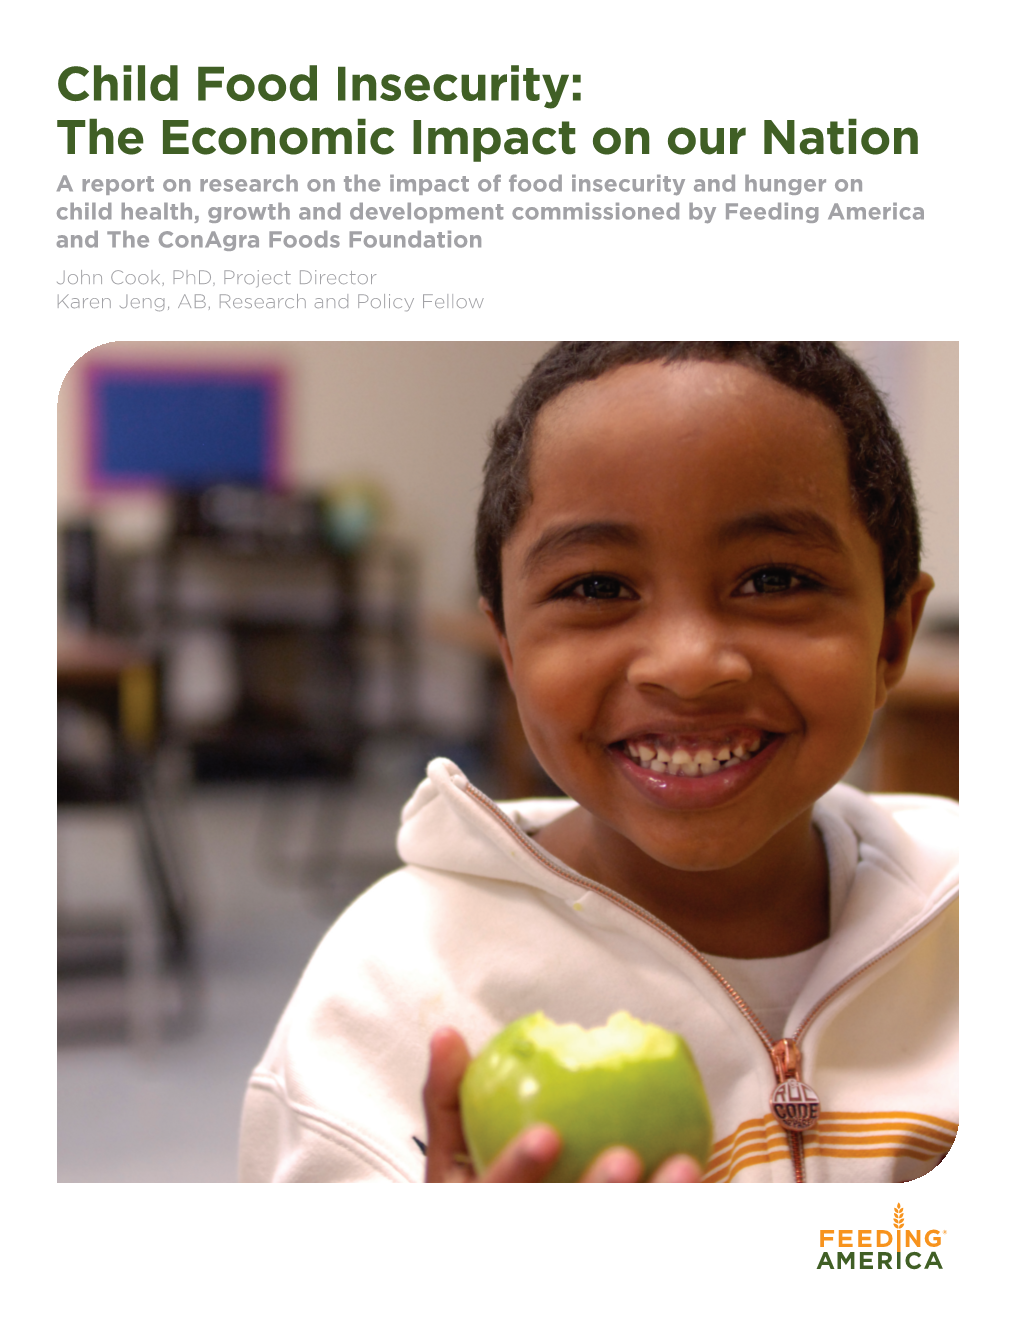 Child Food Insecurity: the Economic Impact on Our Nation